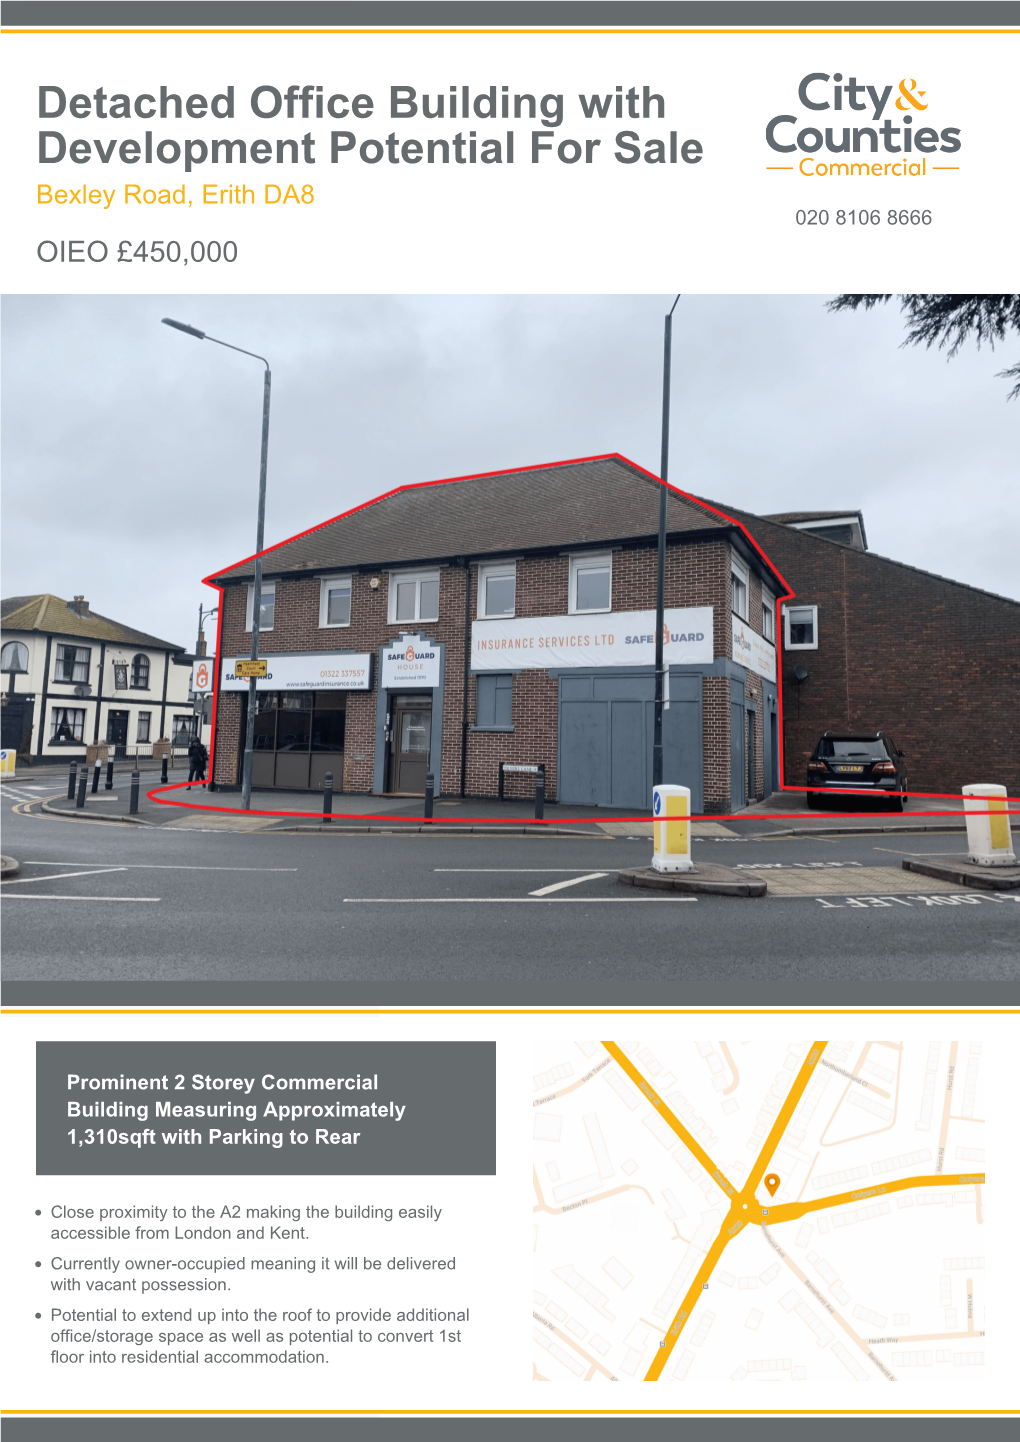 Detached Office Building with Development Potential for Sale Bexley Road, Erith DA8 OIEO £450,000